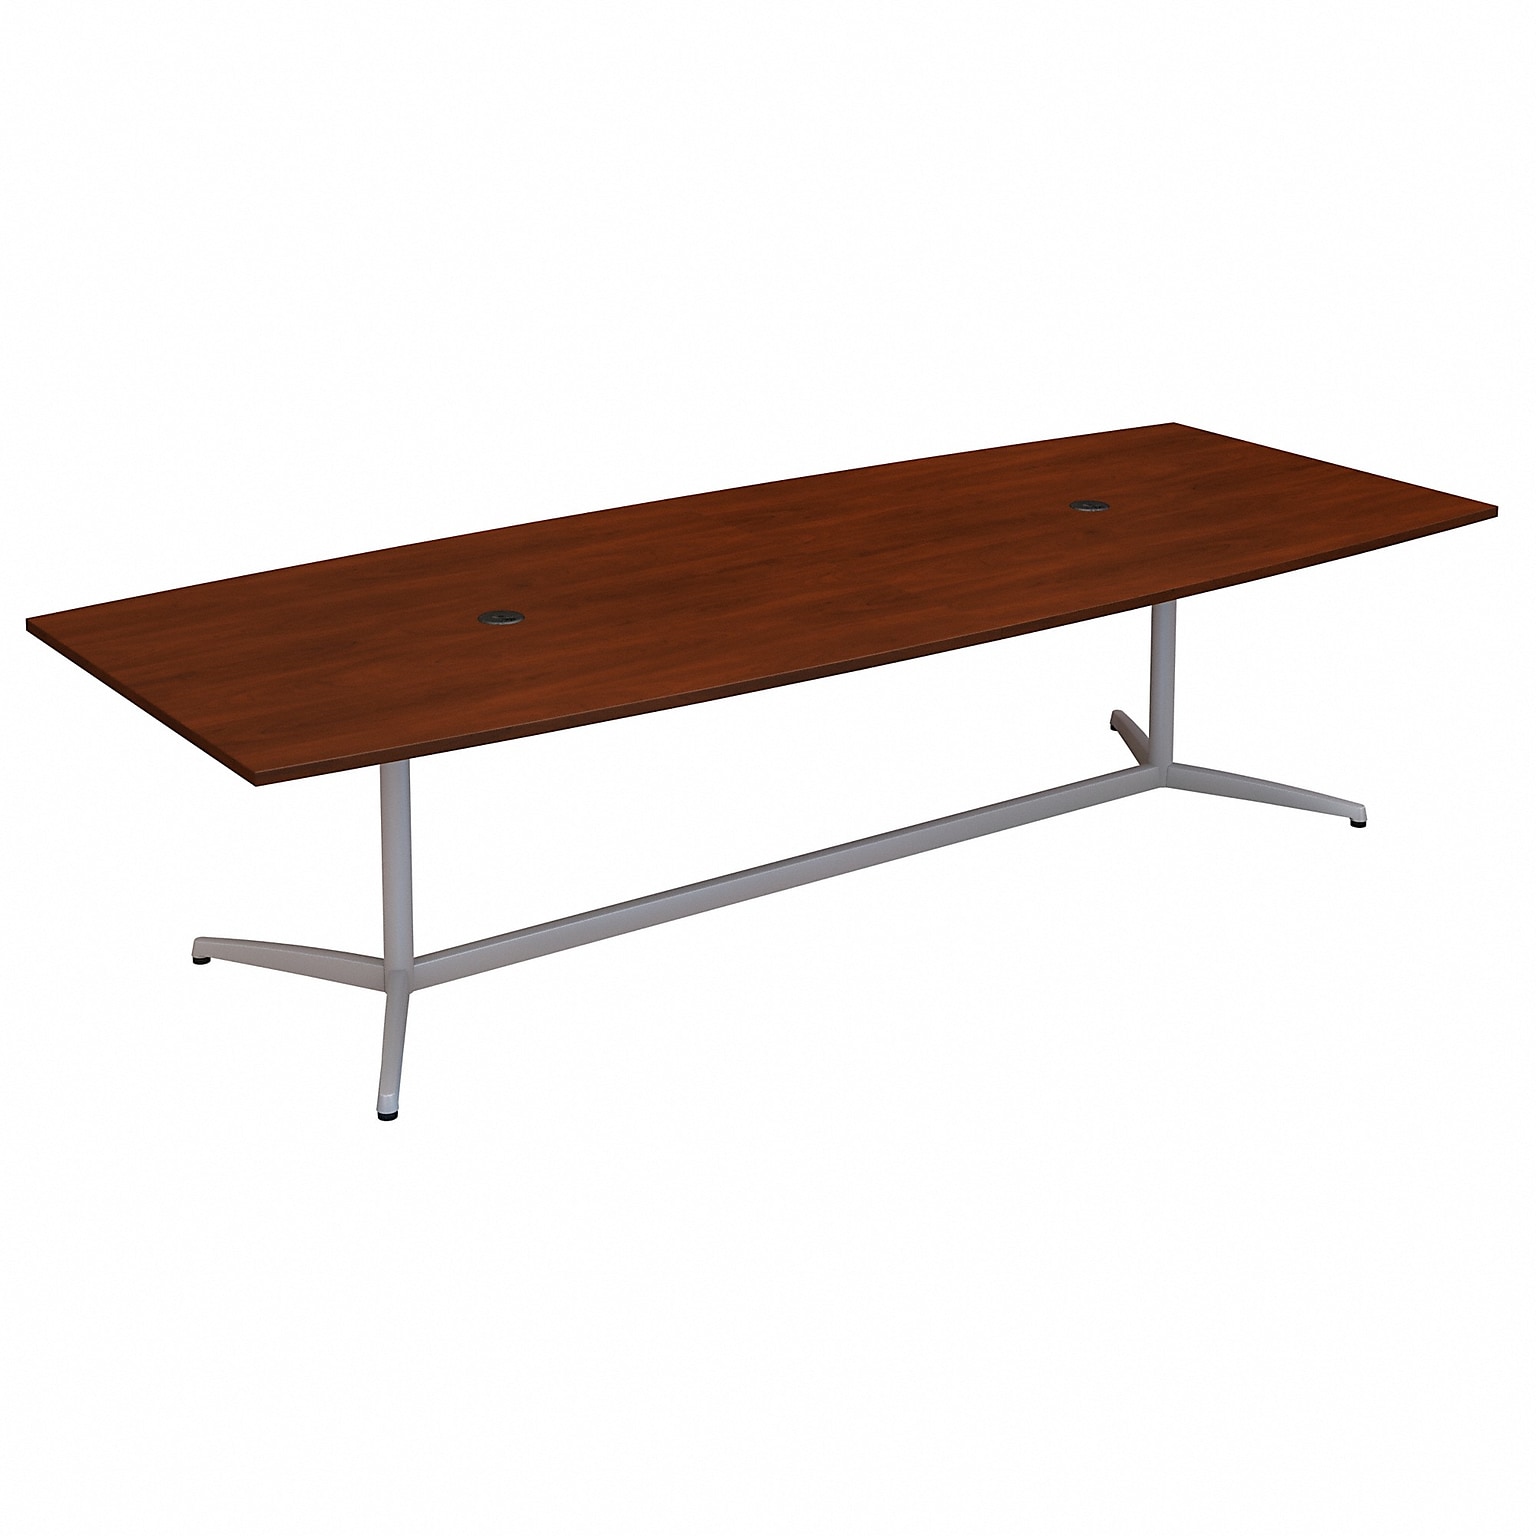 Bush Business Furniture 120W x 48D Boat Shaped Conference Table with Metal Base, Hansen Cherry (99TBM120HCSVK)